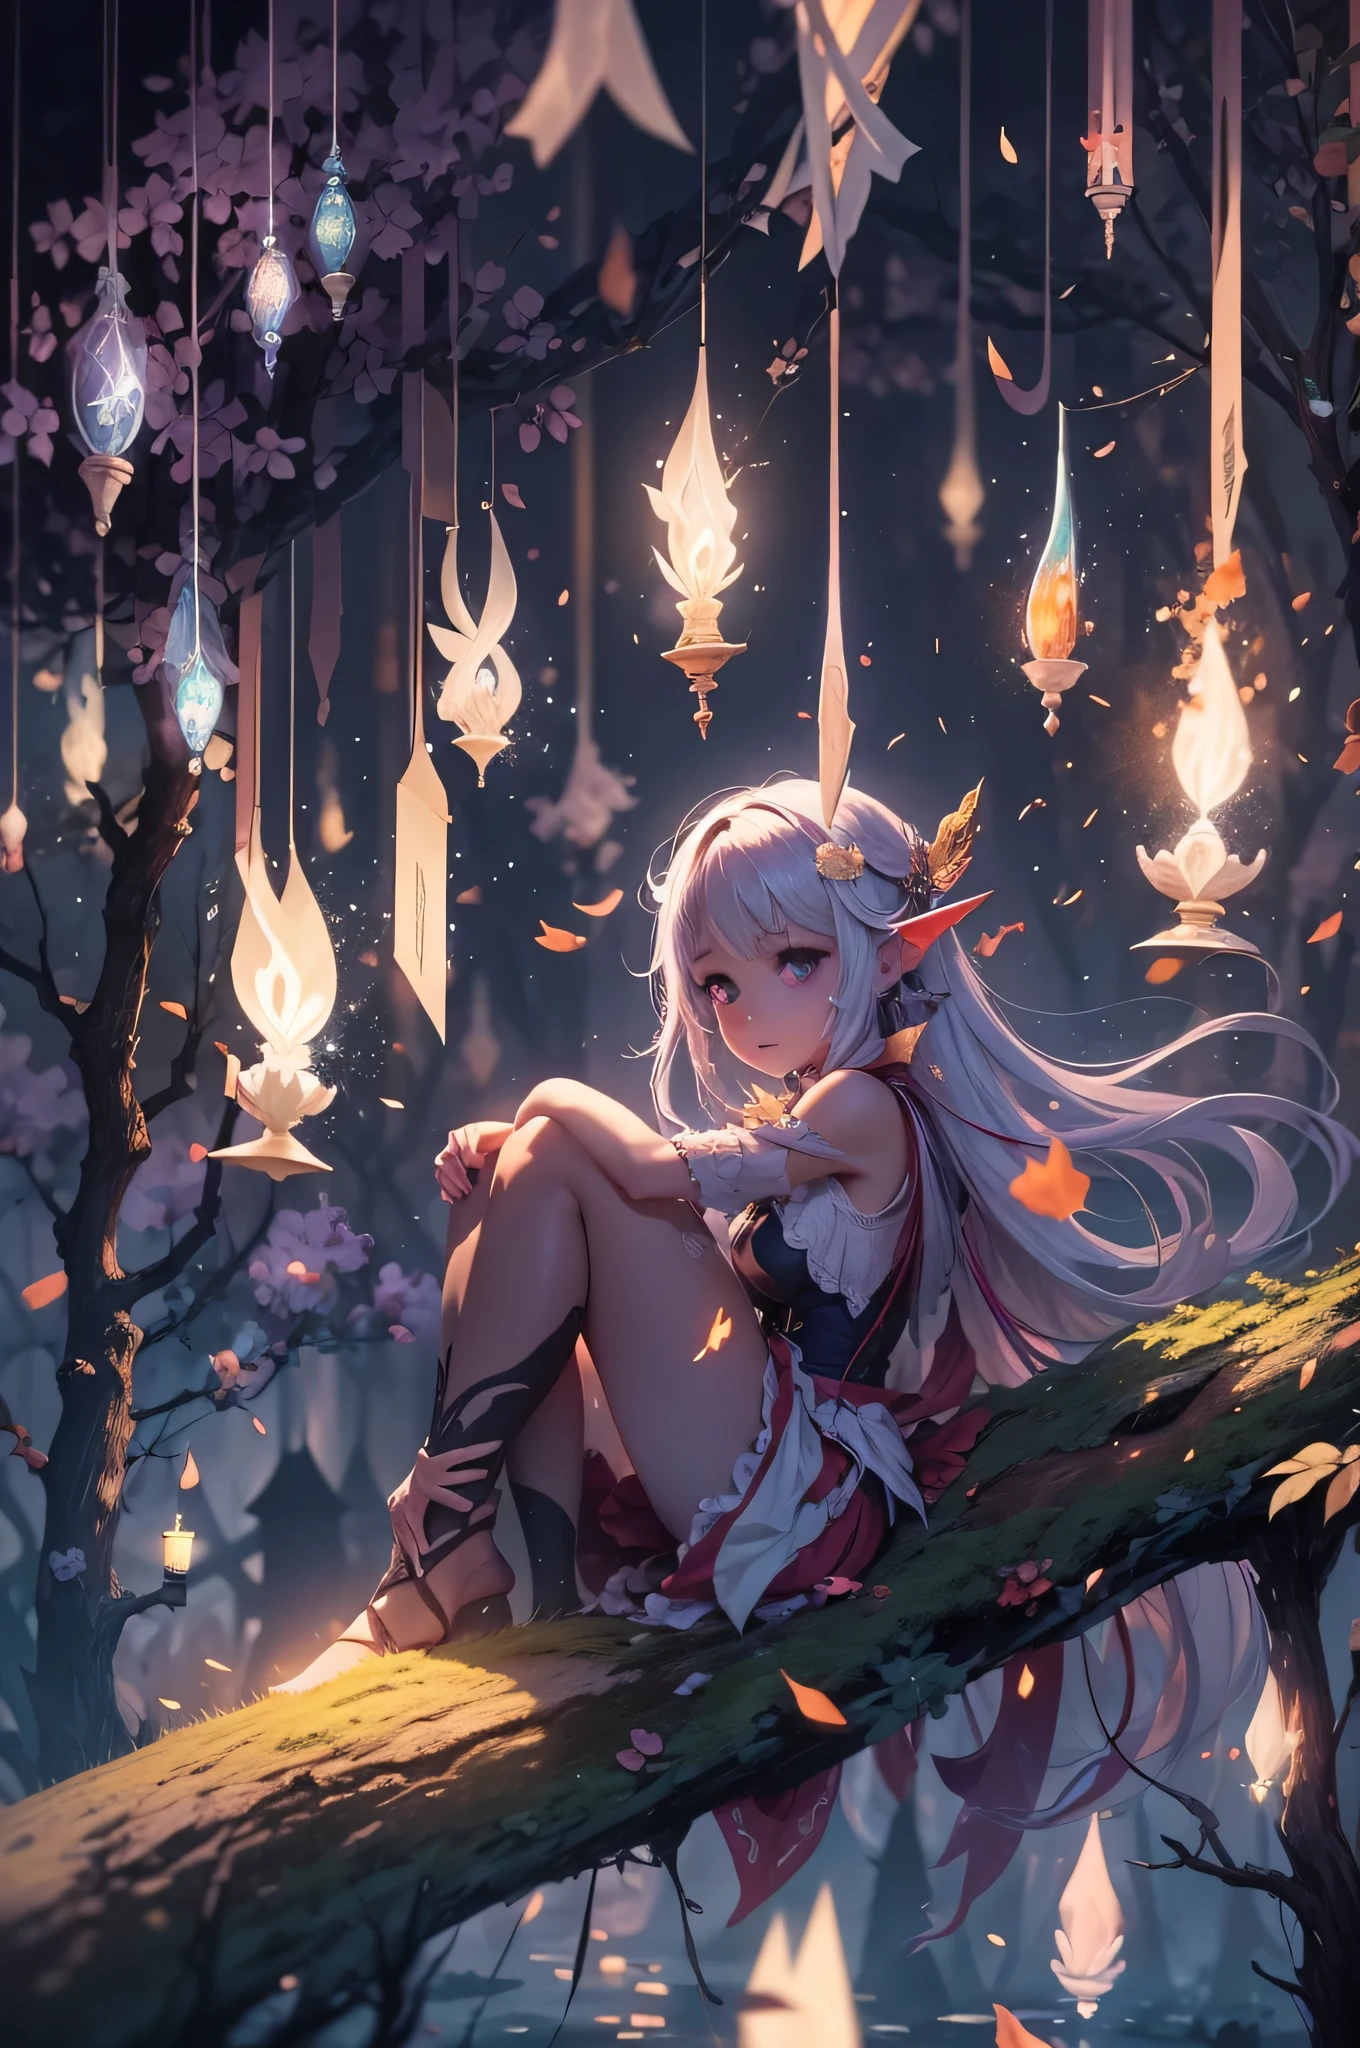 （（shot from a far distance）），（Shadow elf decorated with streamers and fireflies），（（Bonfires and shining ores on dark nights&Wind blowing effect&floating flames）），（girl），（soft light lighting），official art，（wallpaper design）